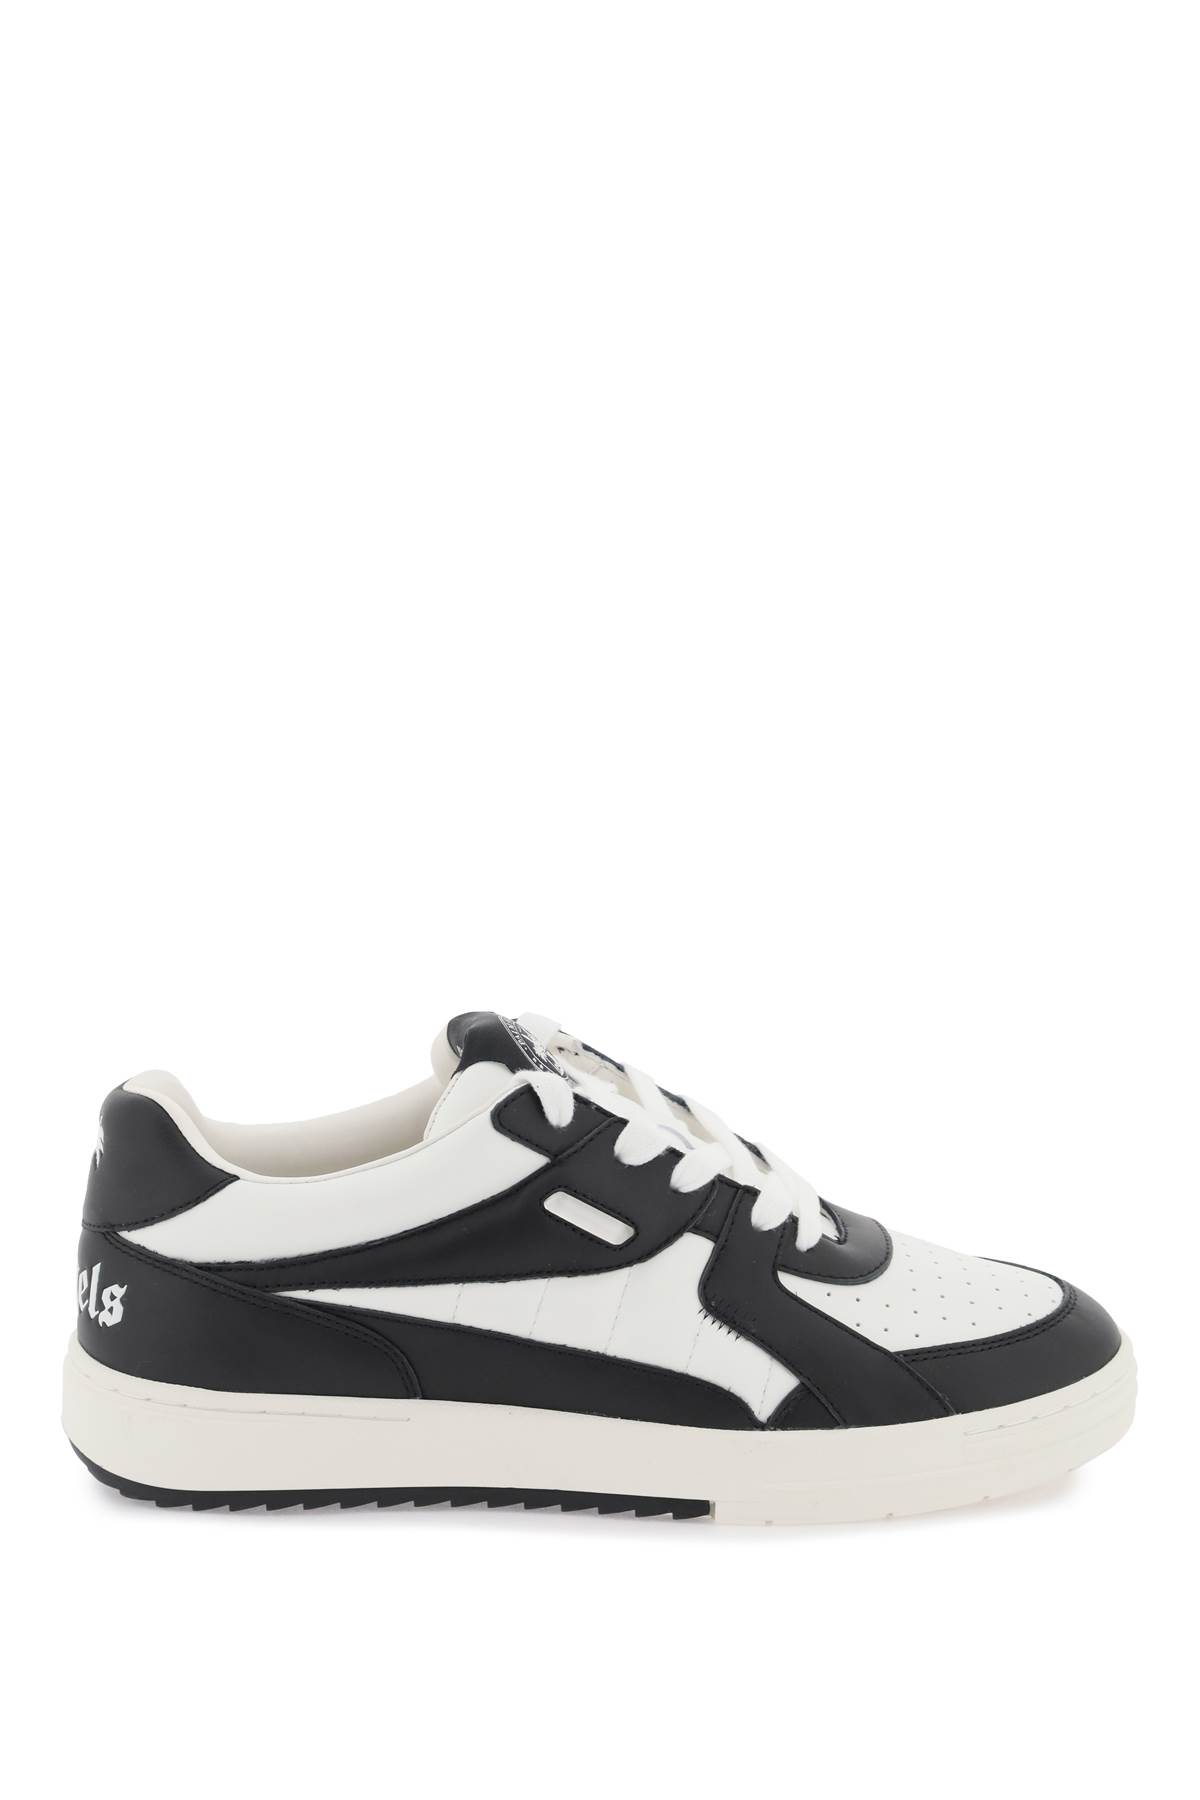 Palm Angels Palm University Leather Sneakers